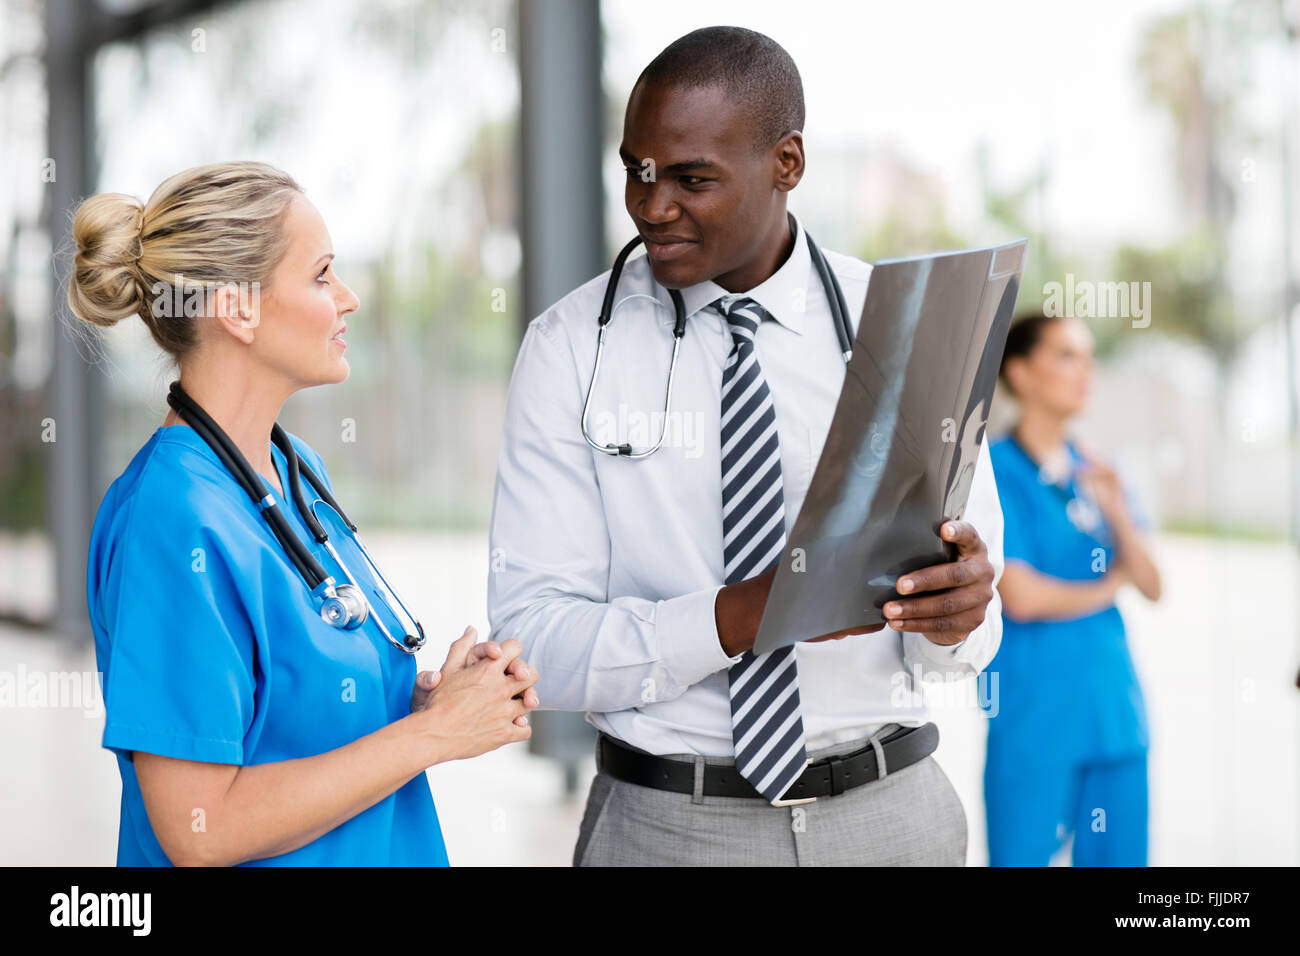 medical doctors working together in hospital Stock Photo